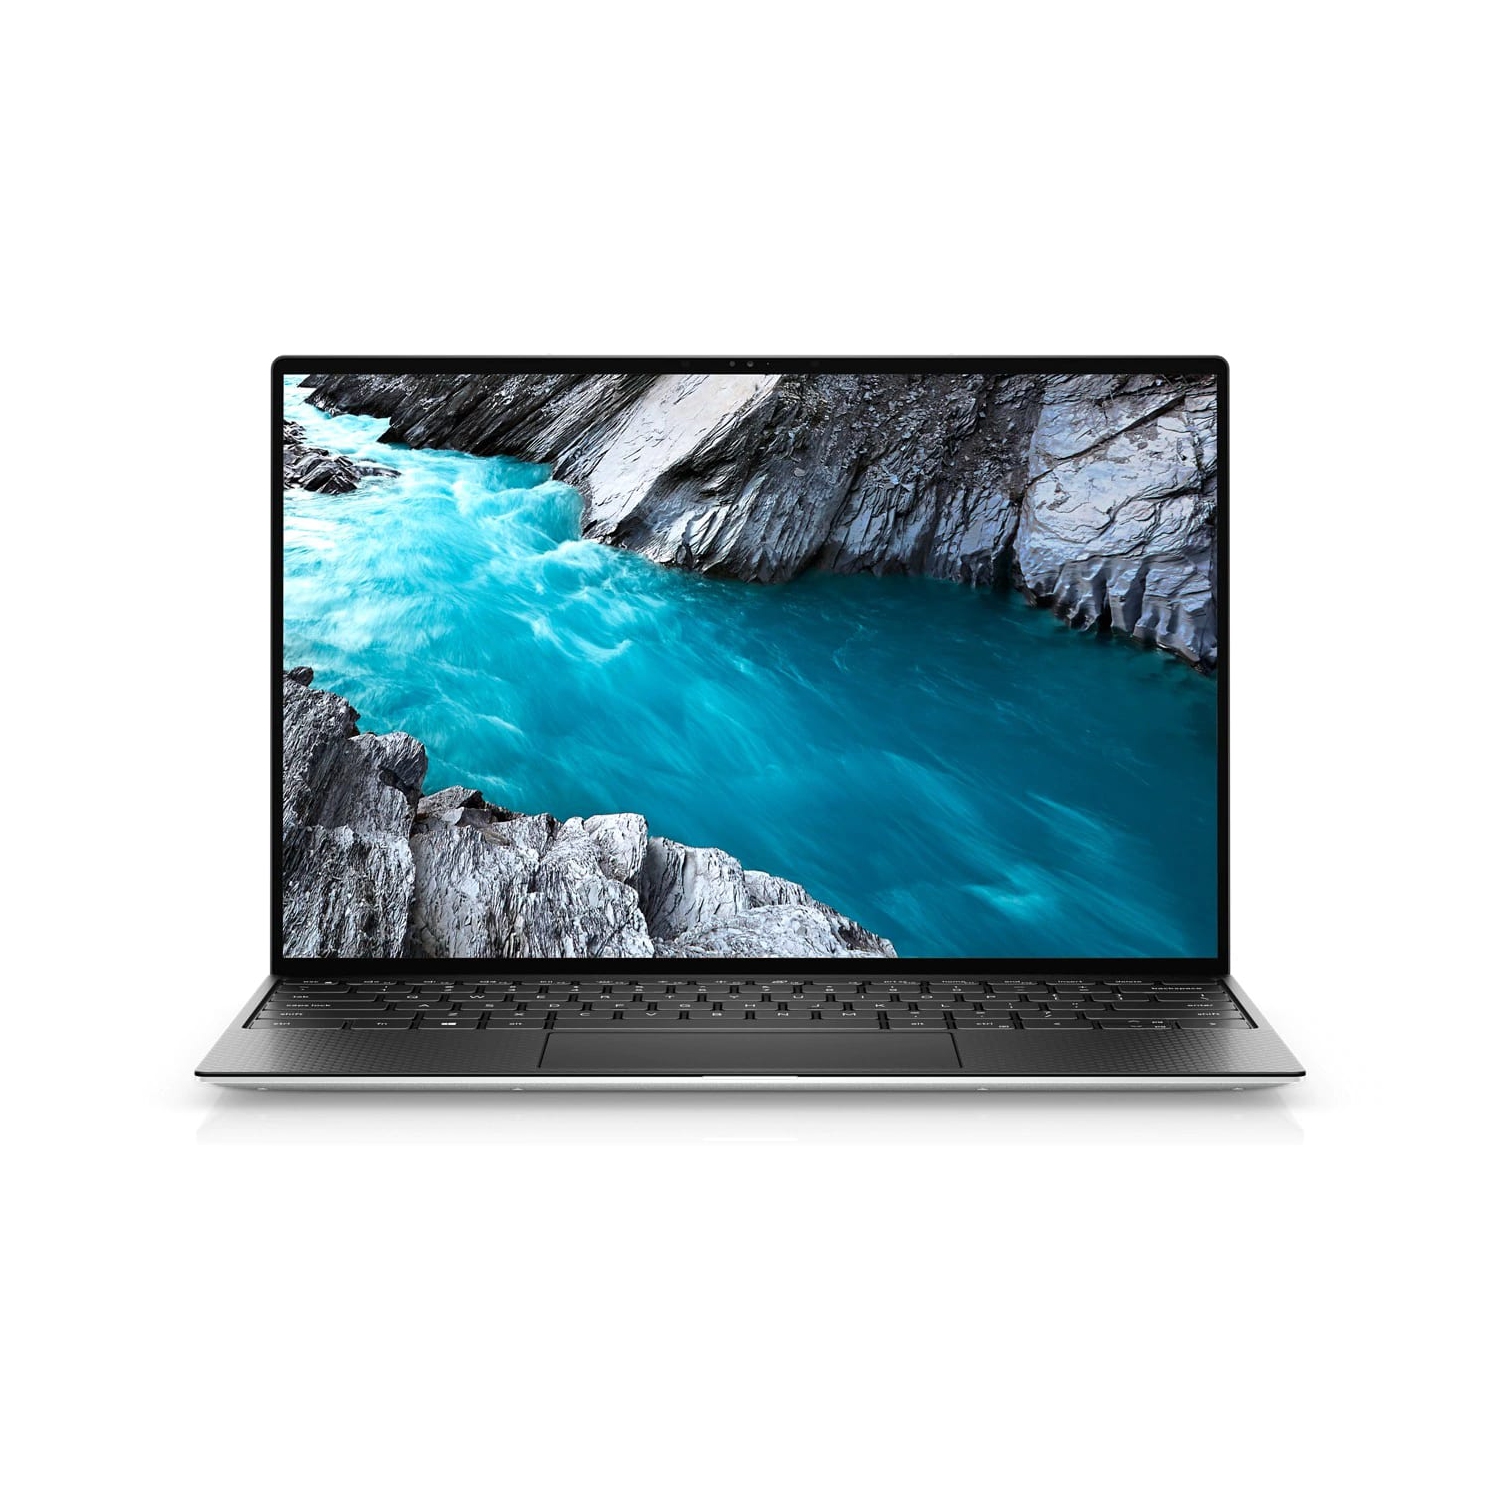 Refurbished (Excellent) - Dell XPS 13 9310 Laptop (2020) | 13.4" 4K Touch | Core i7 - 512GB SSD - 16GB RAM | 4 Cores @ 5 GHz - 11th Gen CPU Certified Refurbished